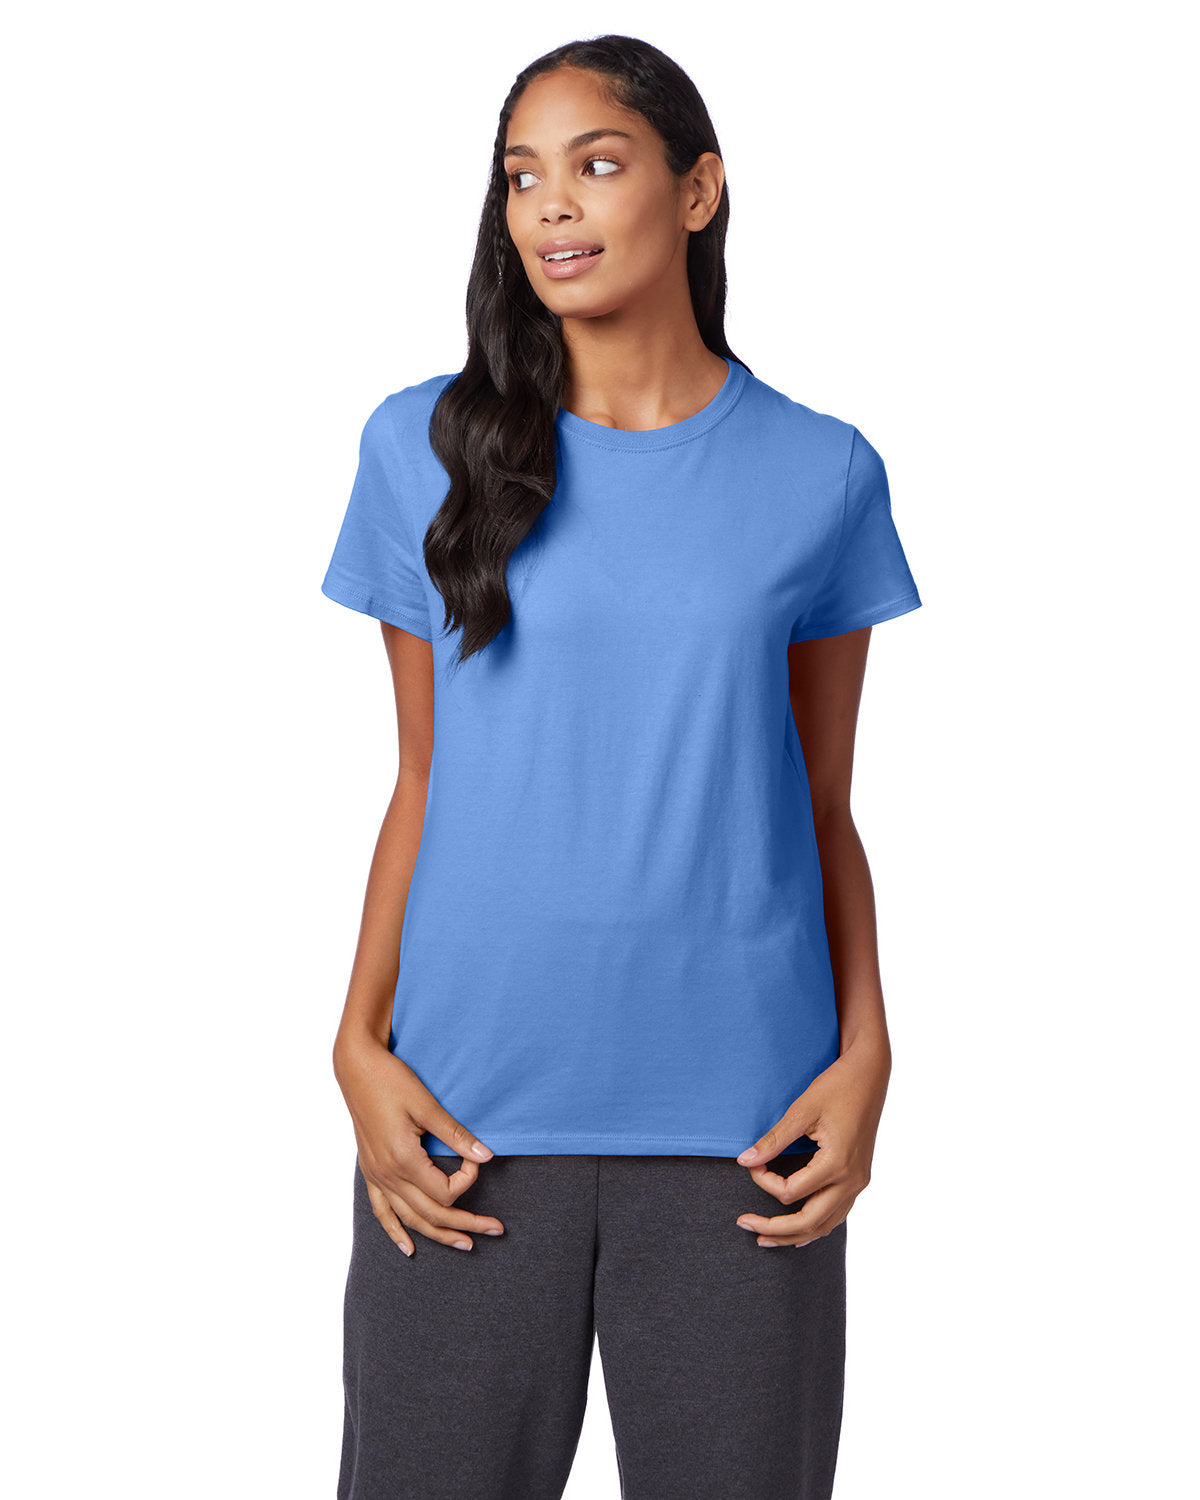 ELEVATE-YOUR-STYLE-WITH-THE-HANES-LADIES-PERFECT-T-T-SHIRT